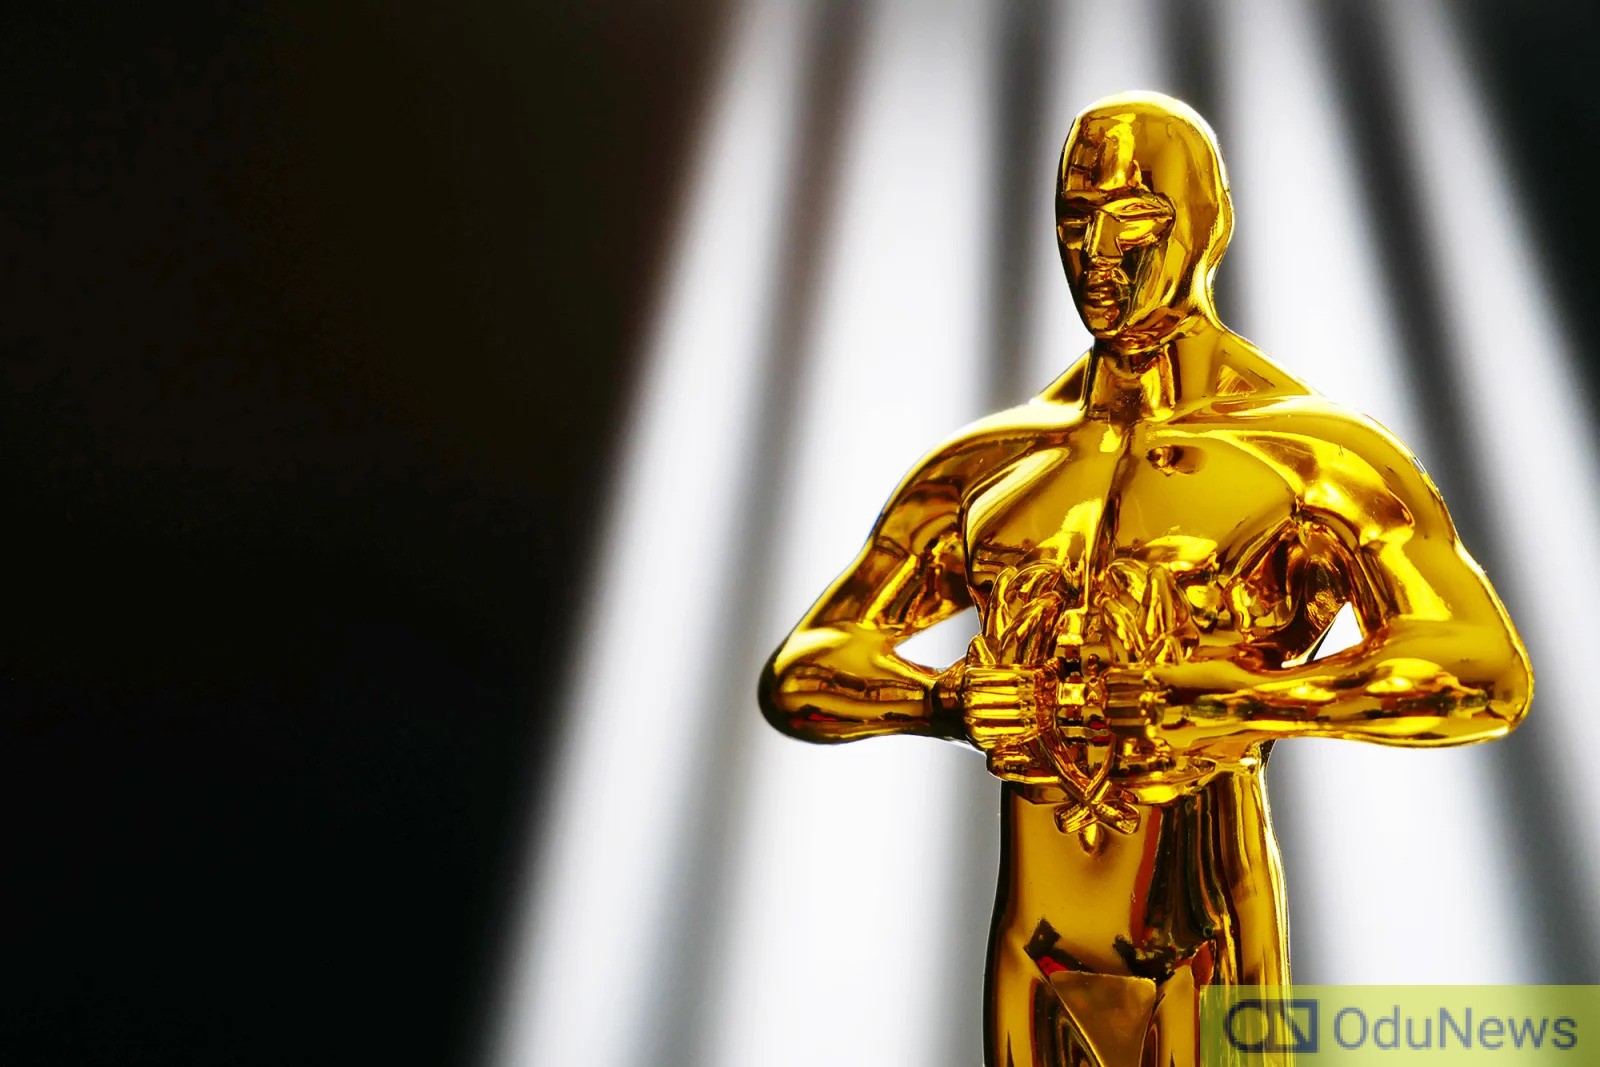 OSCAR AWARDS 2023: Complete List Of Nominees In All Categories  